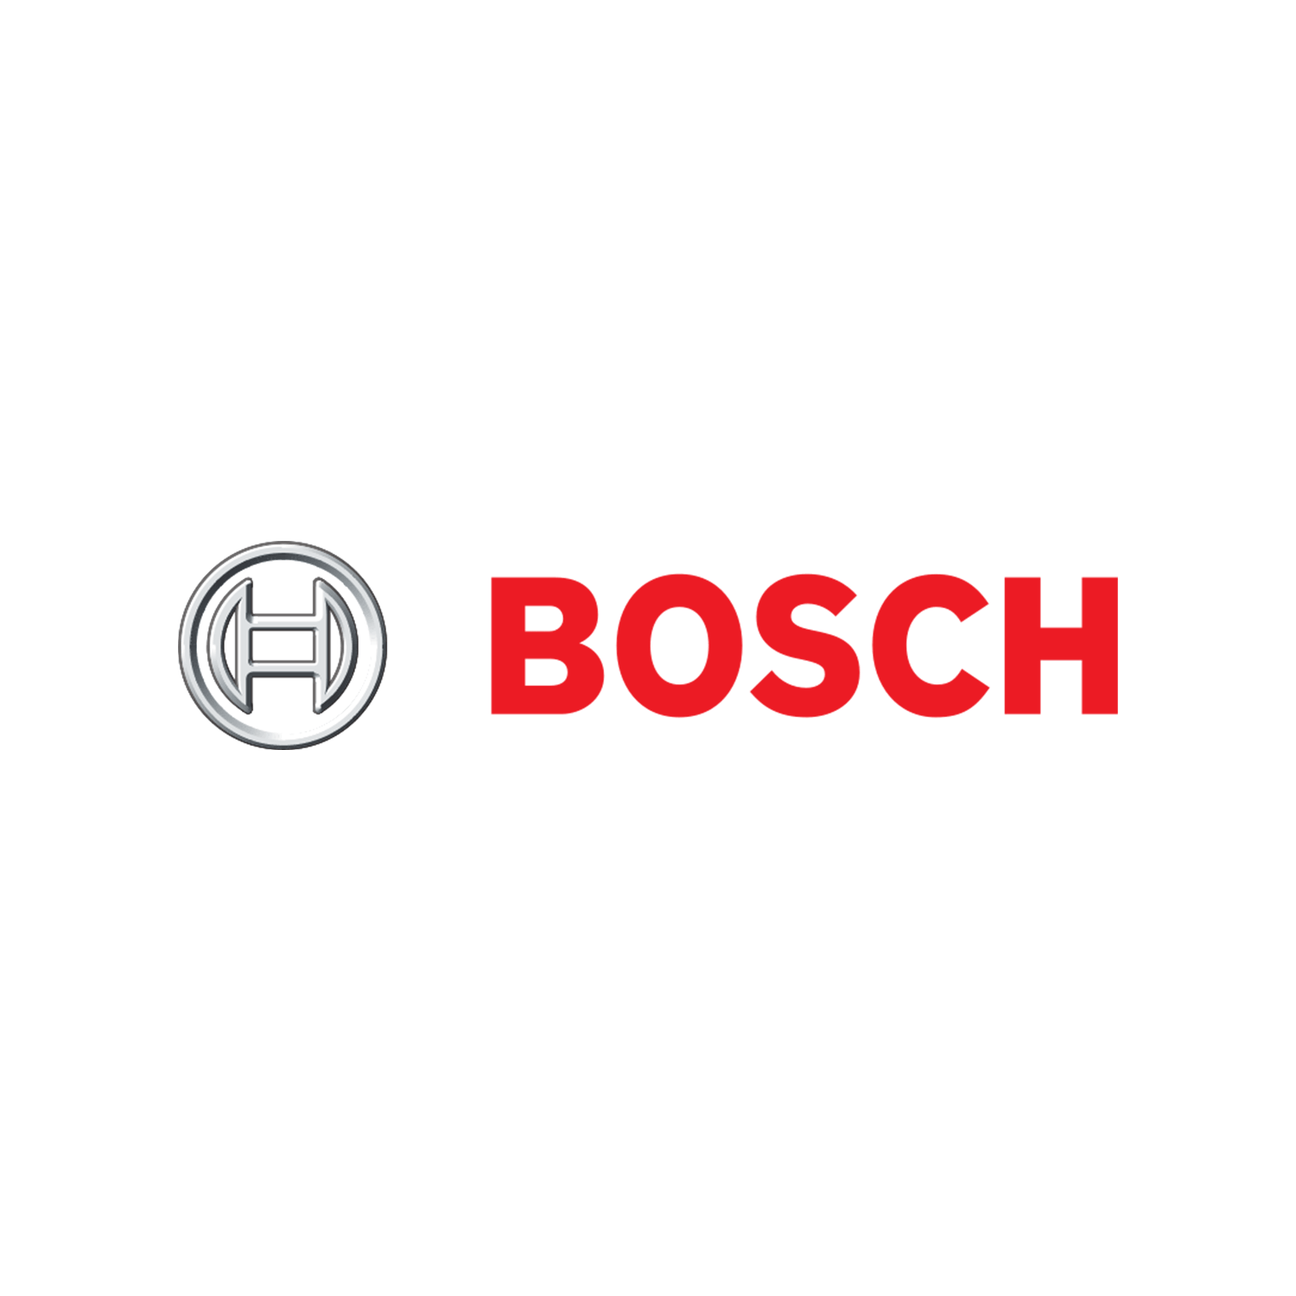 Bosch Cooktop & Oven Parts - My Oven Spares